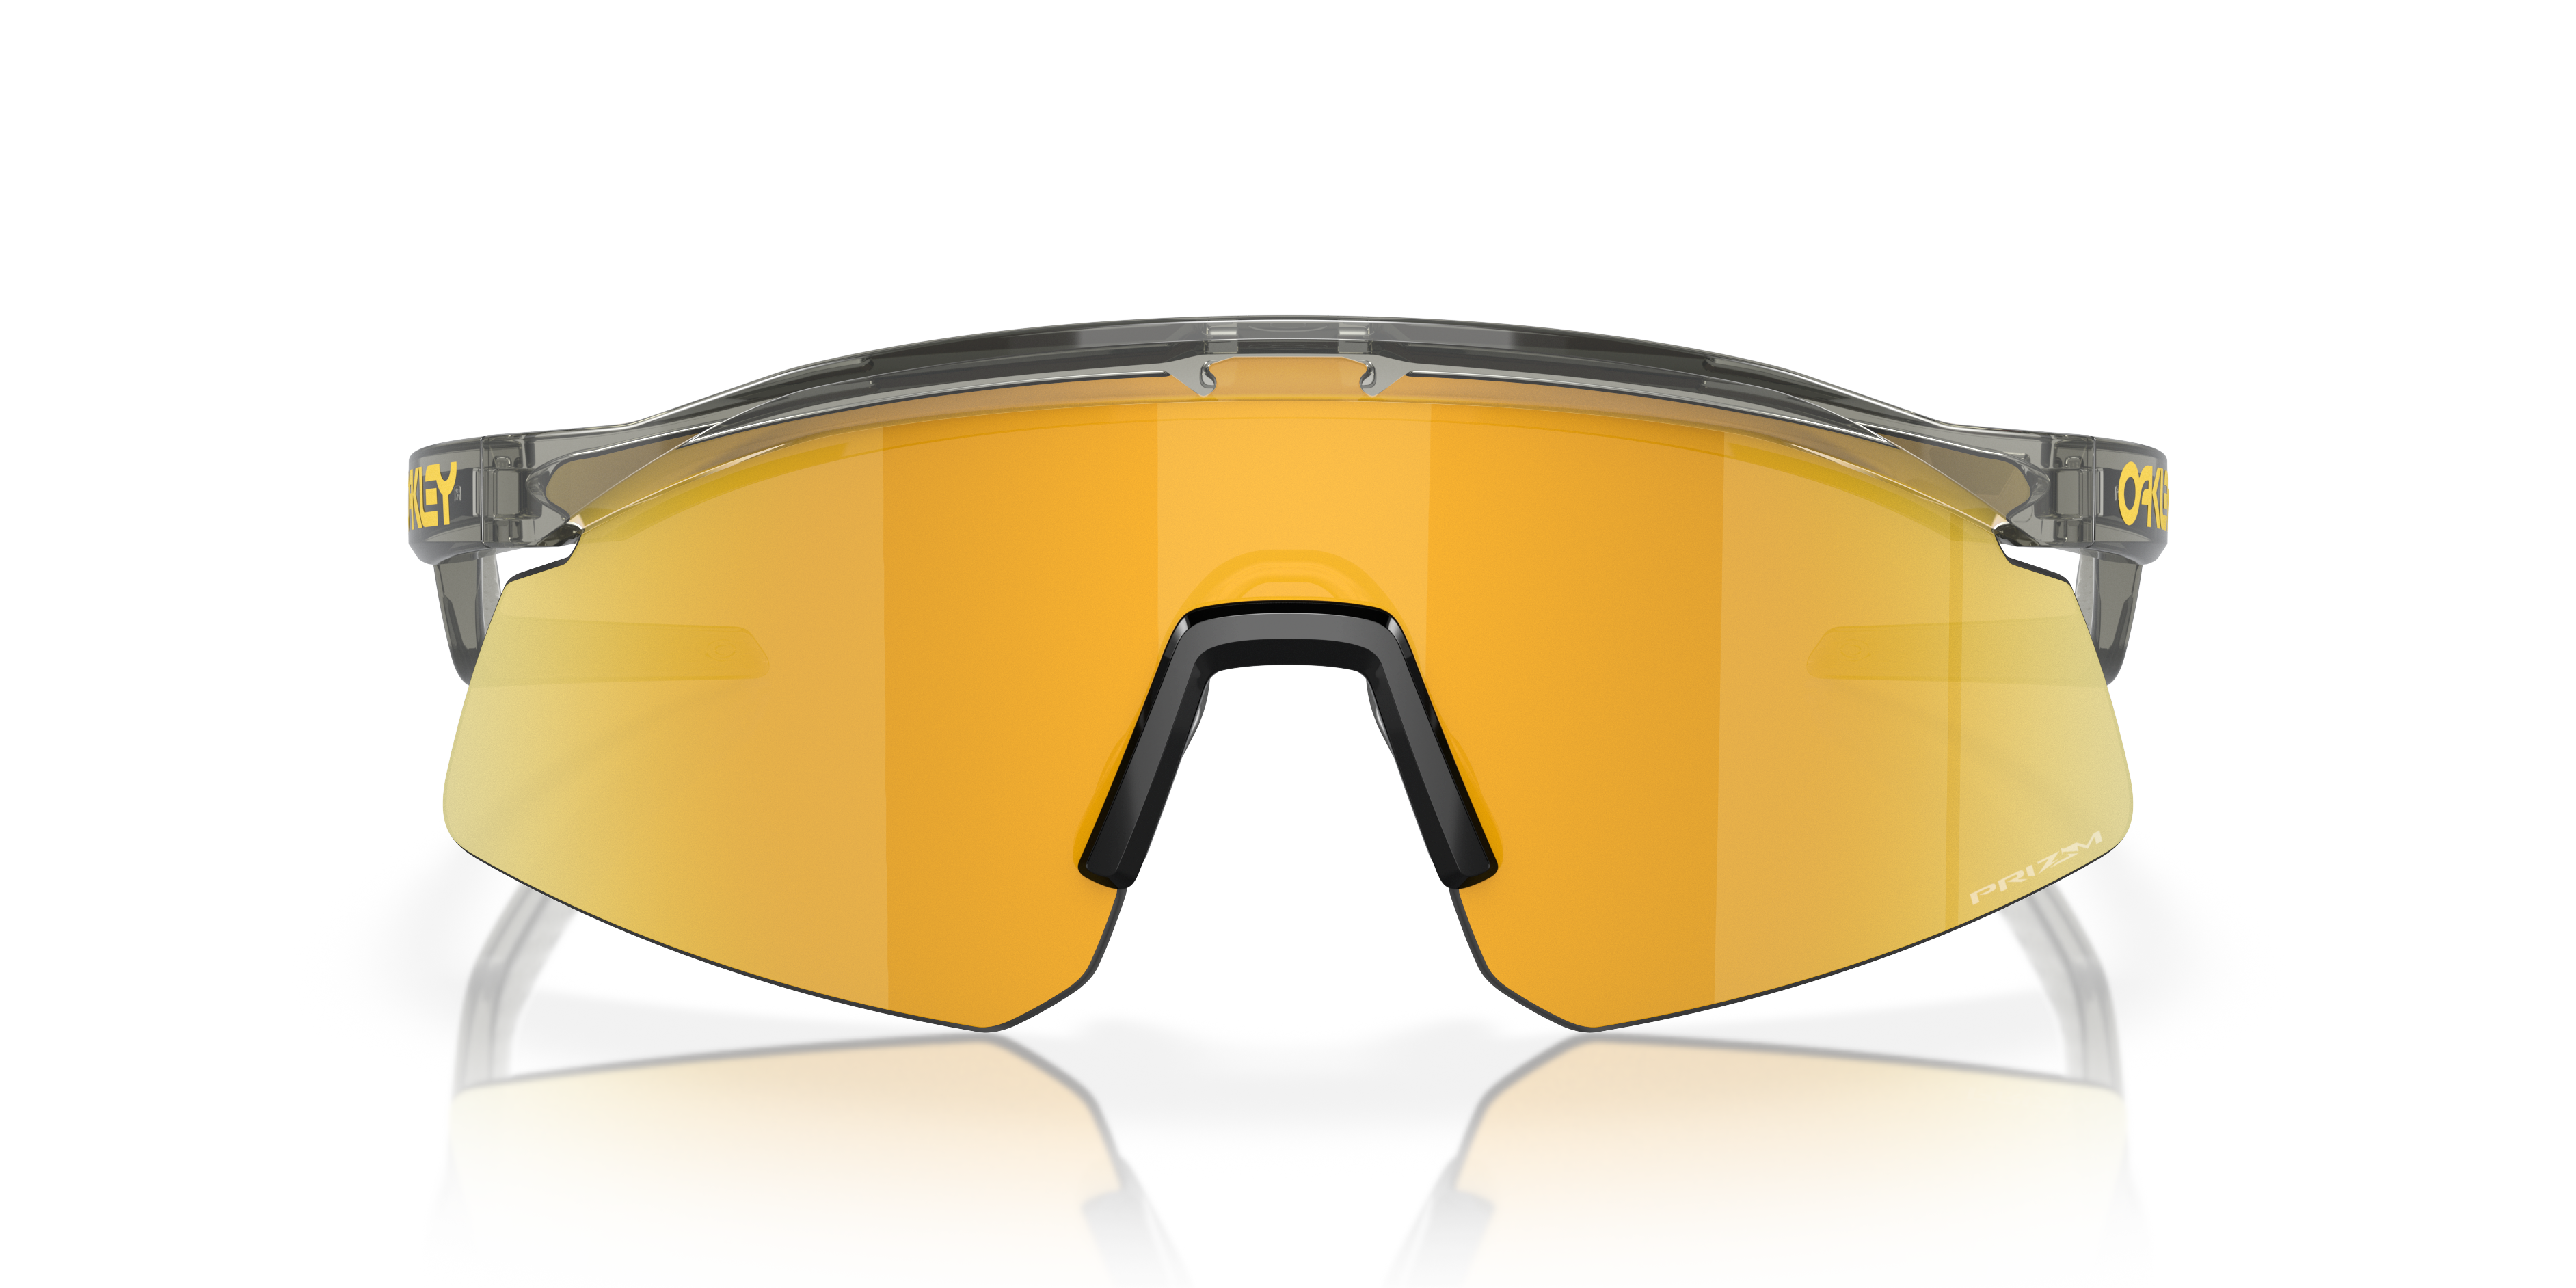 [products.image.front] Oakley HYDRA OO9229 922910